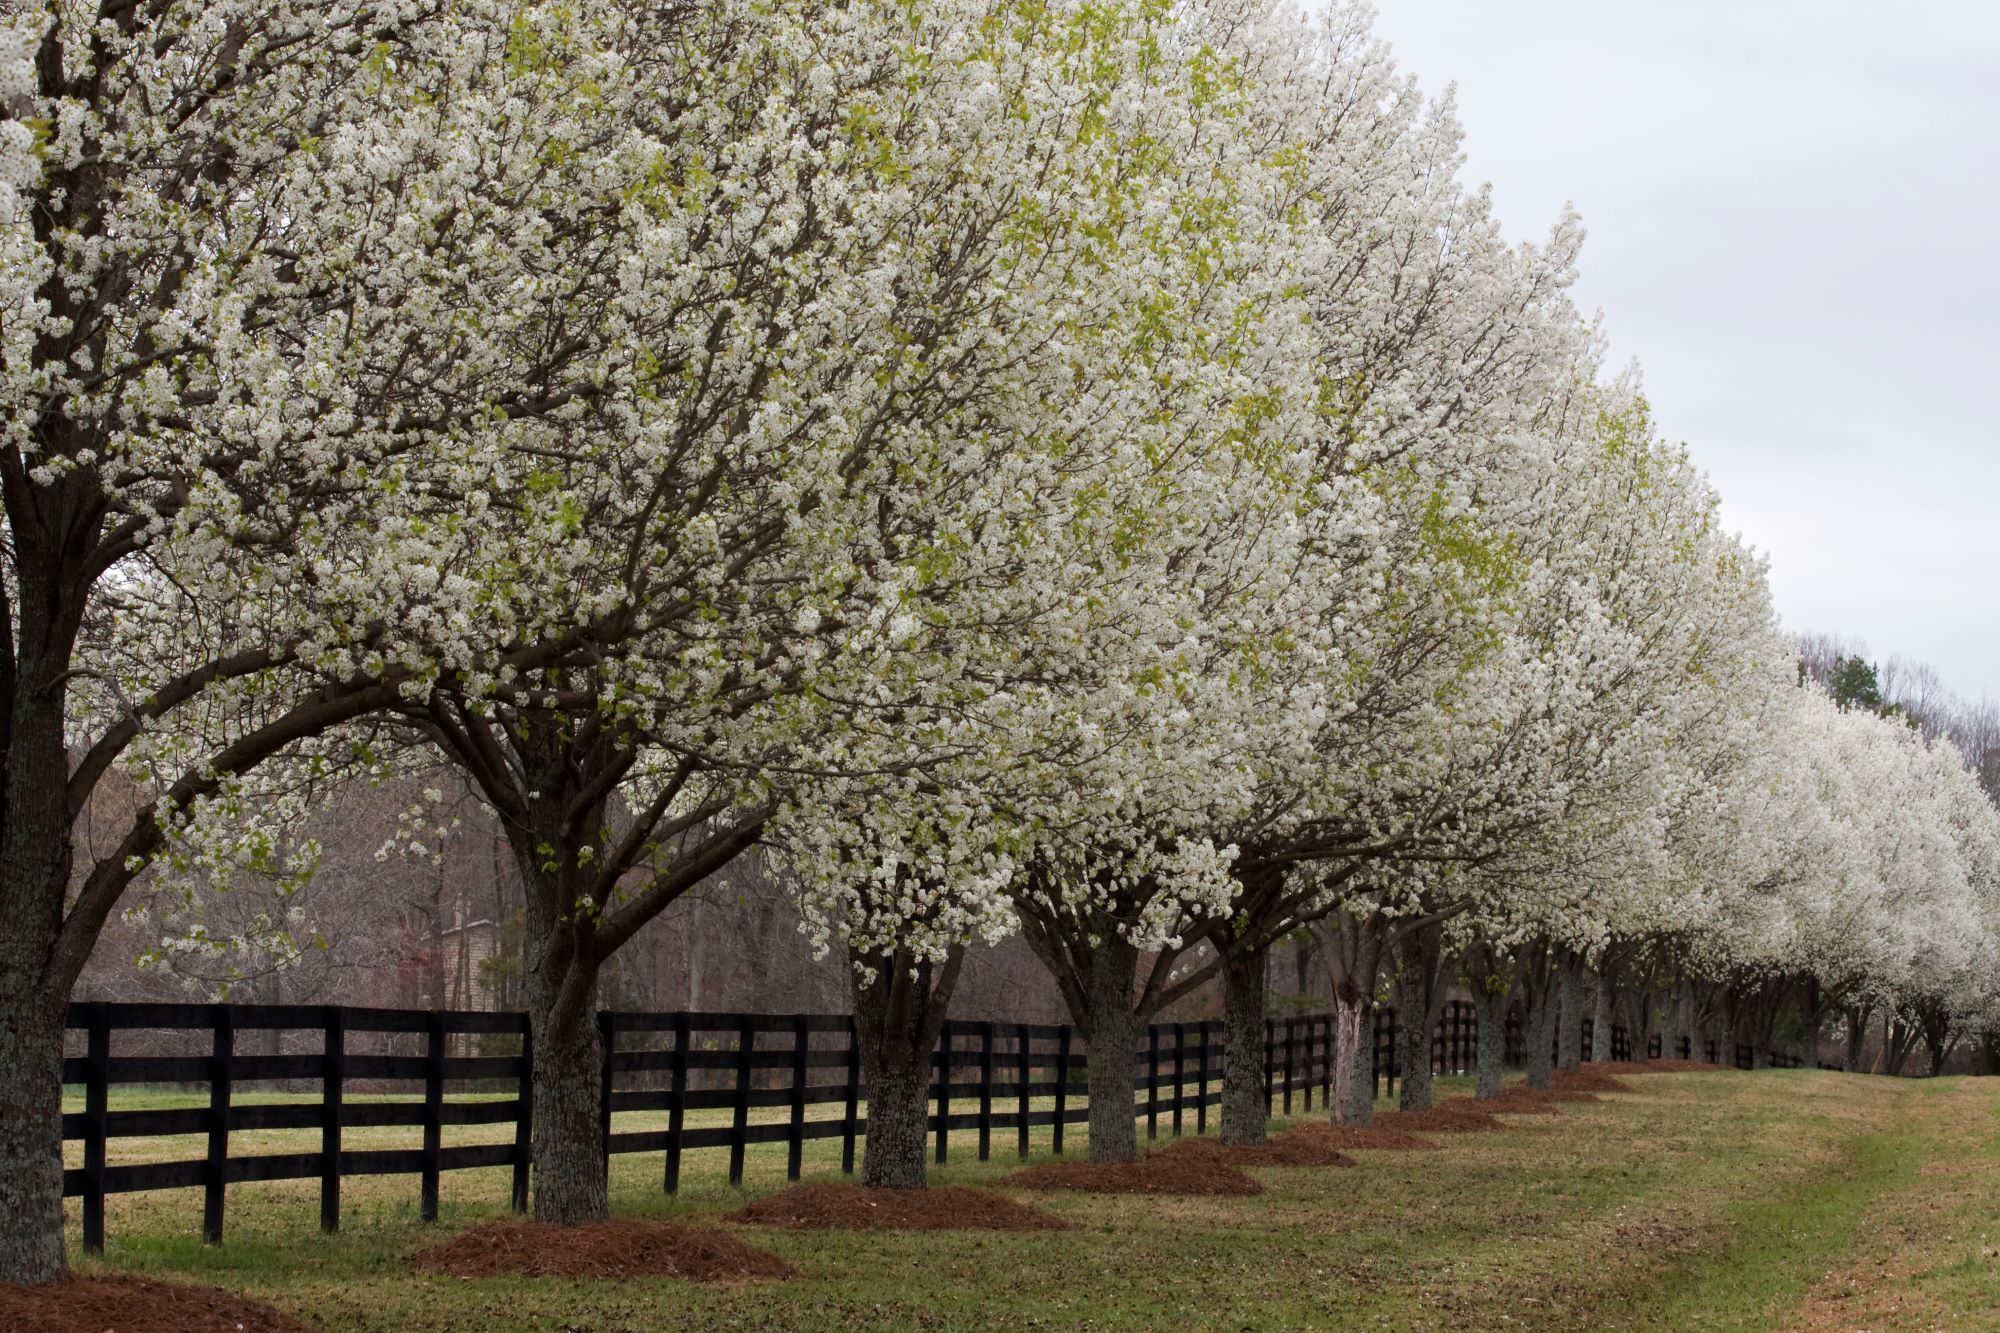 Bradford Pear Trees lining the streets. Regency in Cary NC